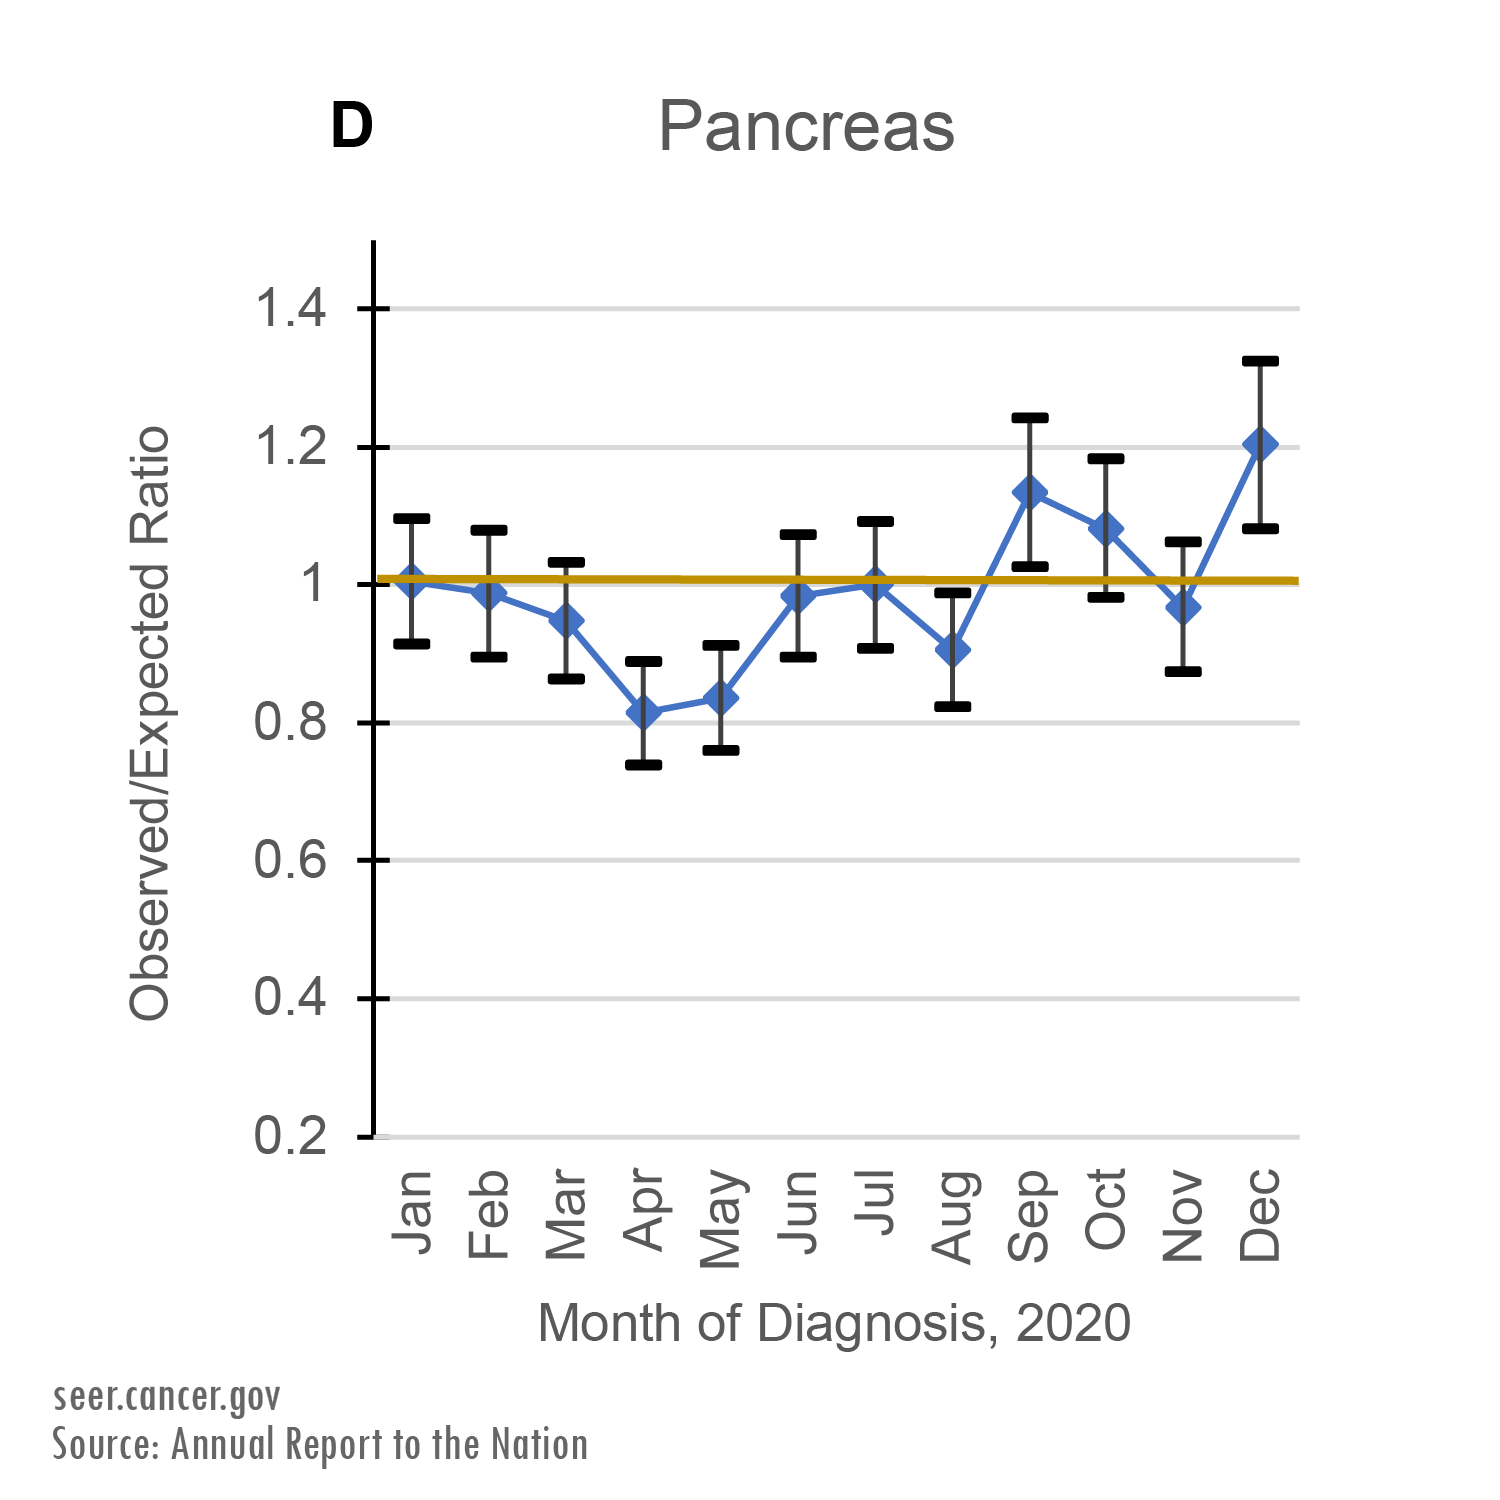 Observed/Expected Ratio of Pancreatic cancer diagnoses by Month of Diagnosis, 2020